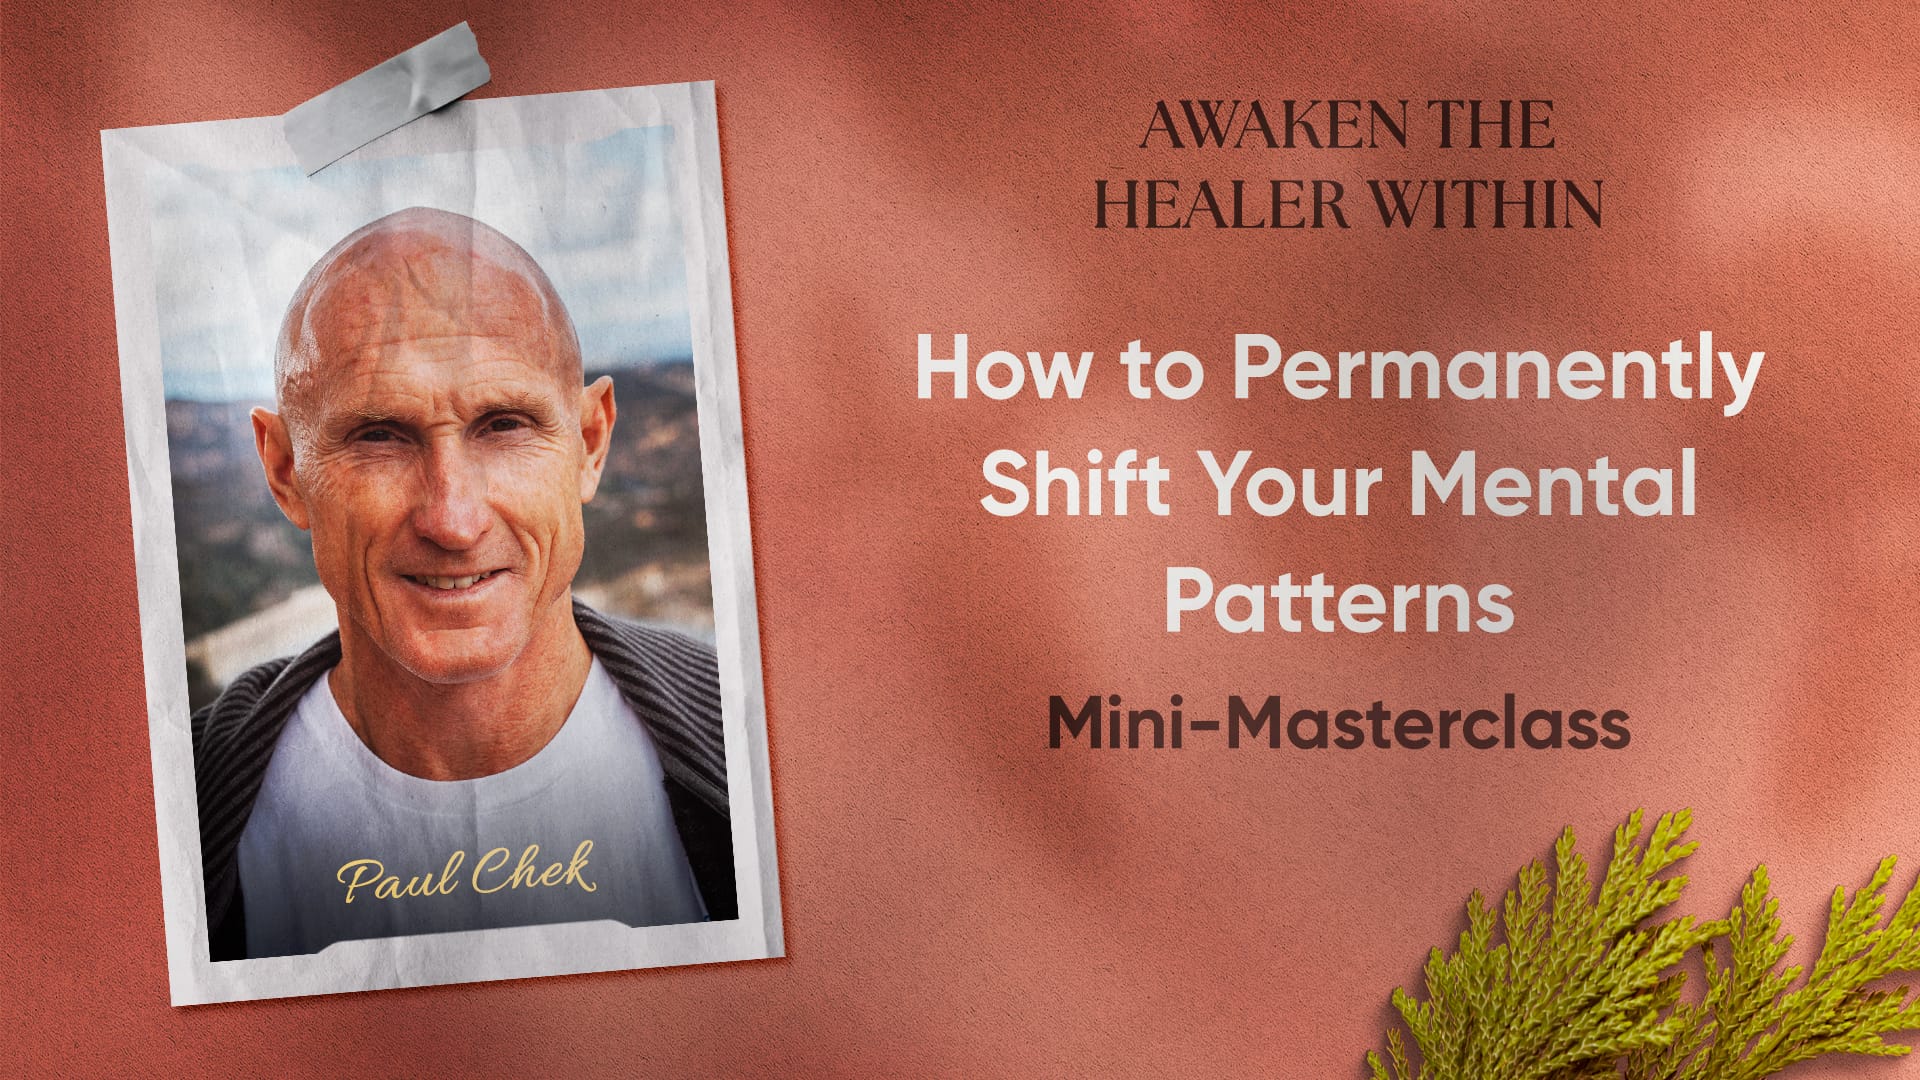 How to Permanently Shift Your Mental Patterns